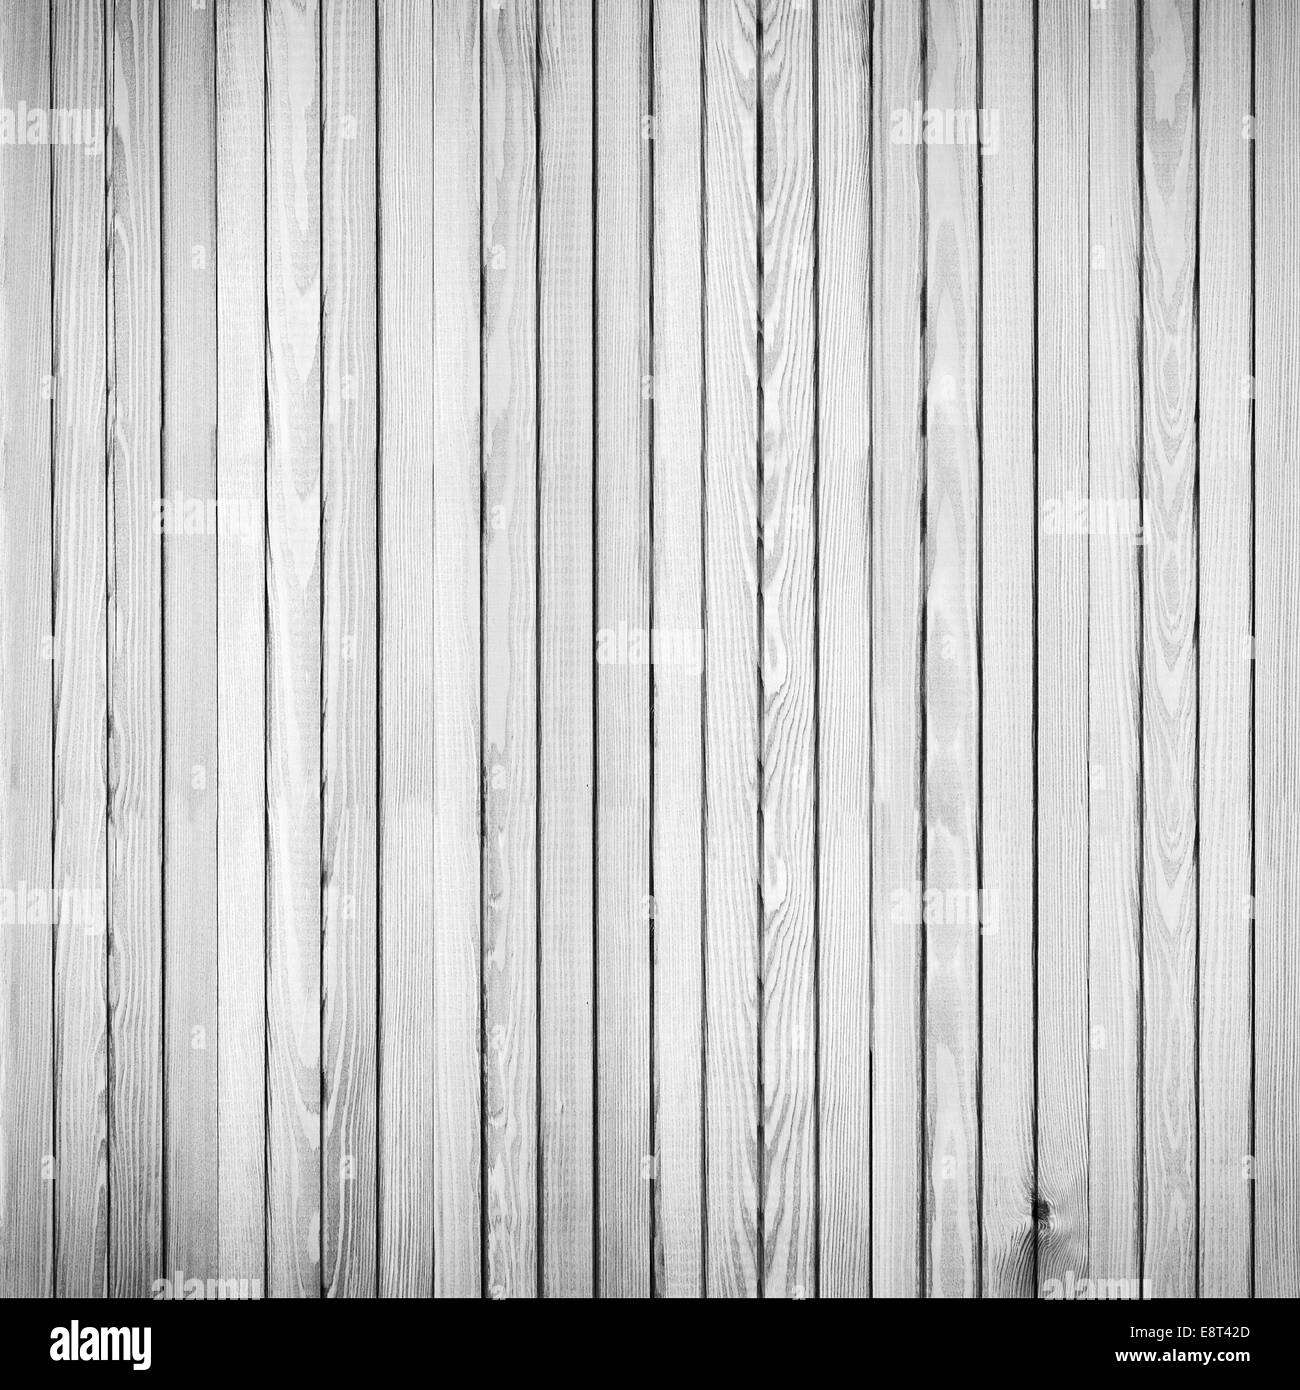 Natural Wooden Surface. Wood Texture for Your Background. Stock Photo